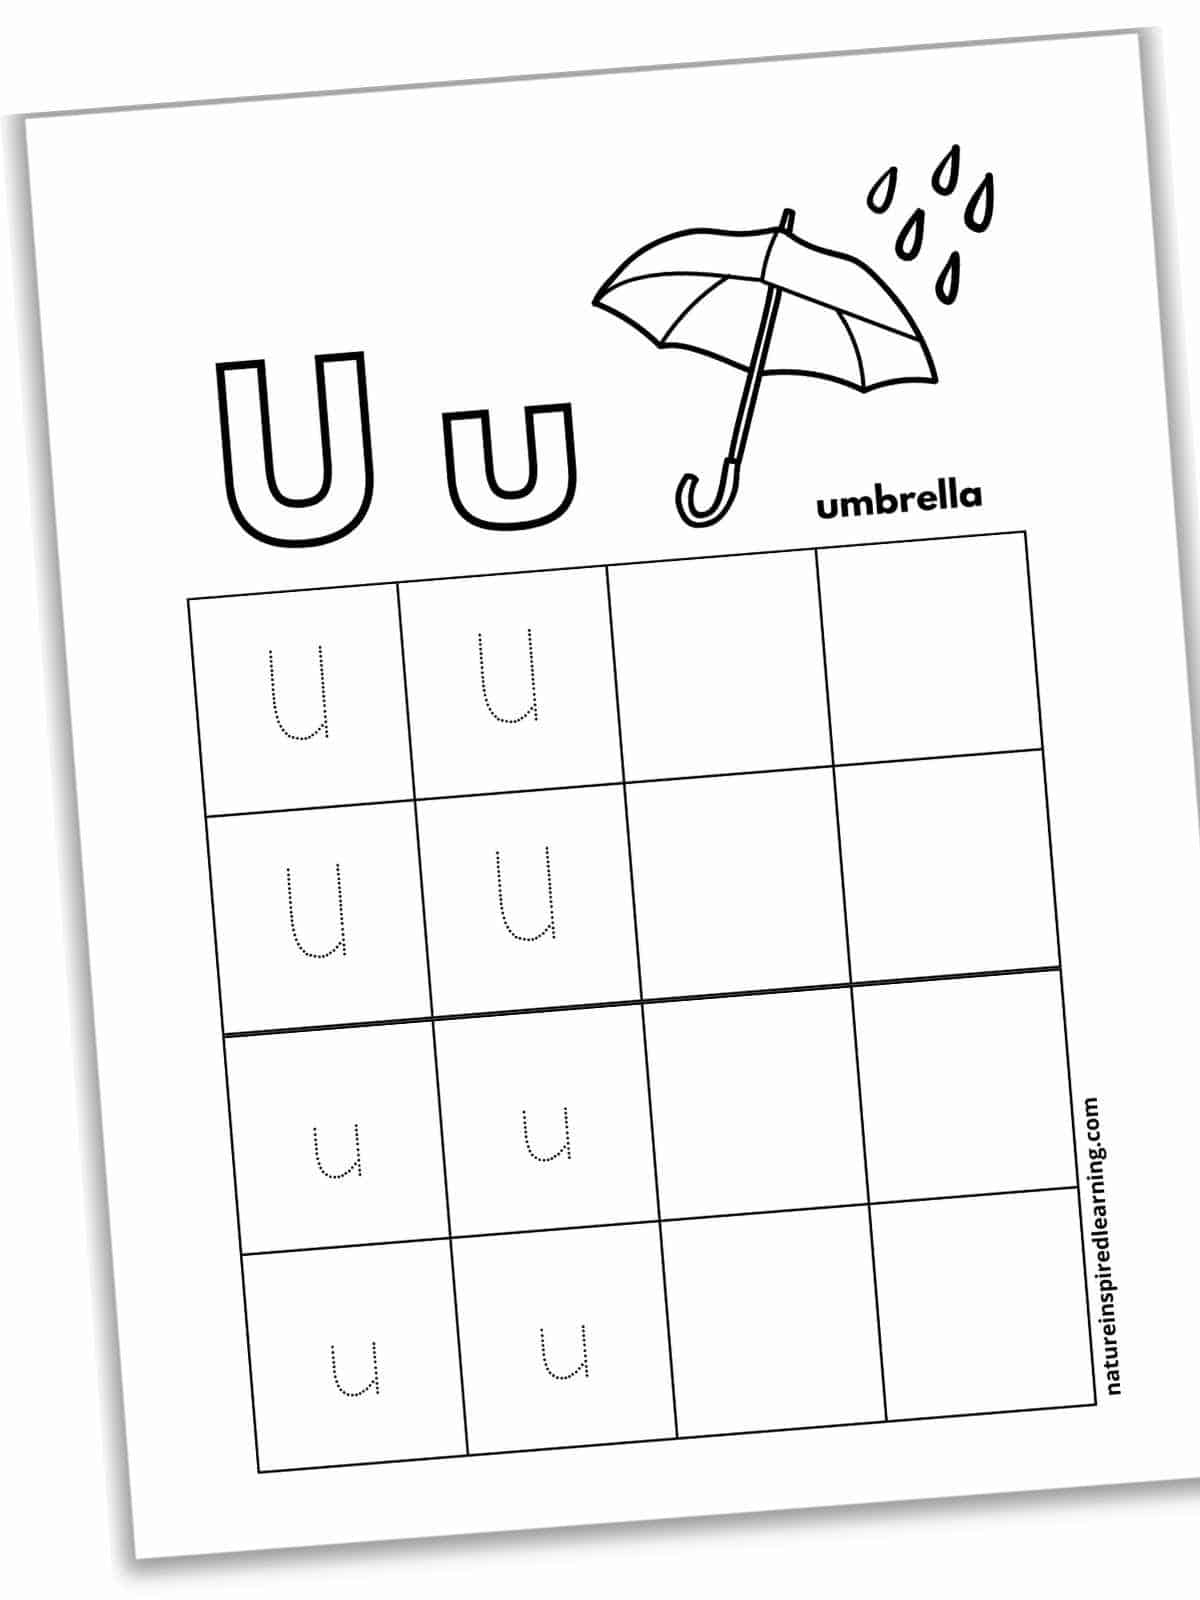 Worksheet with a black and white umbrella with rain next to outlines of U u. Large grid with squares below with dotted U's, u's, and blank boxes.